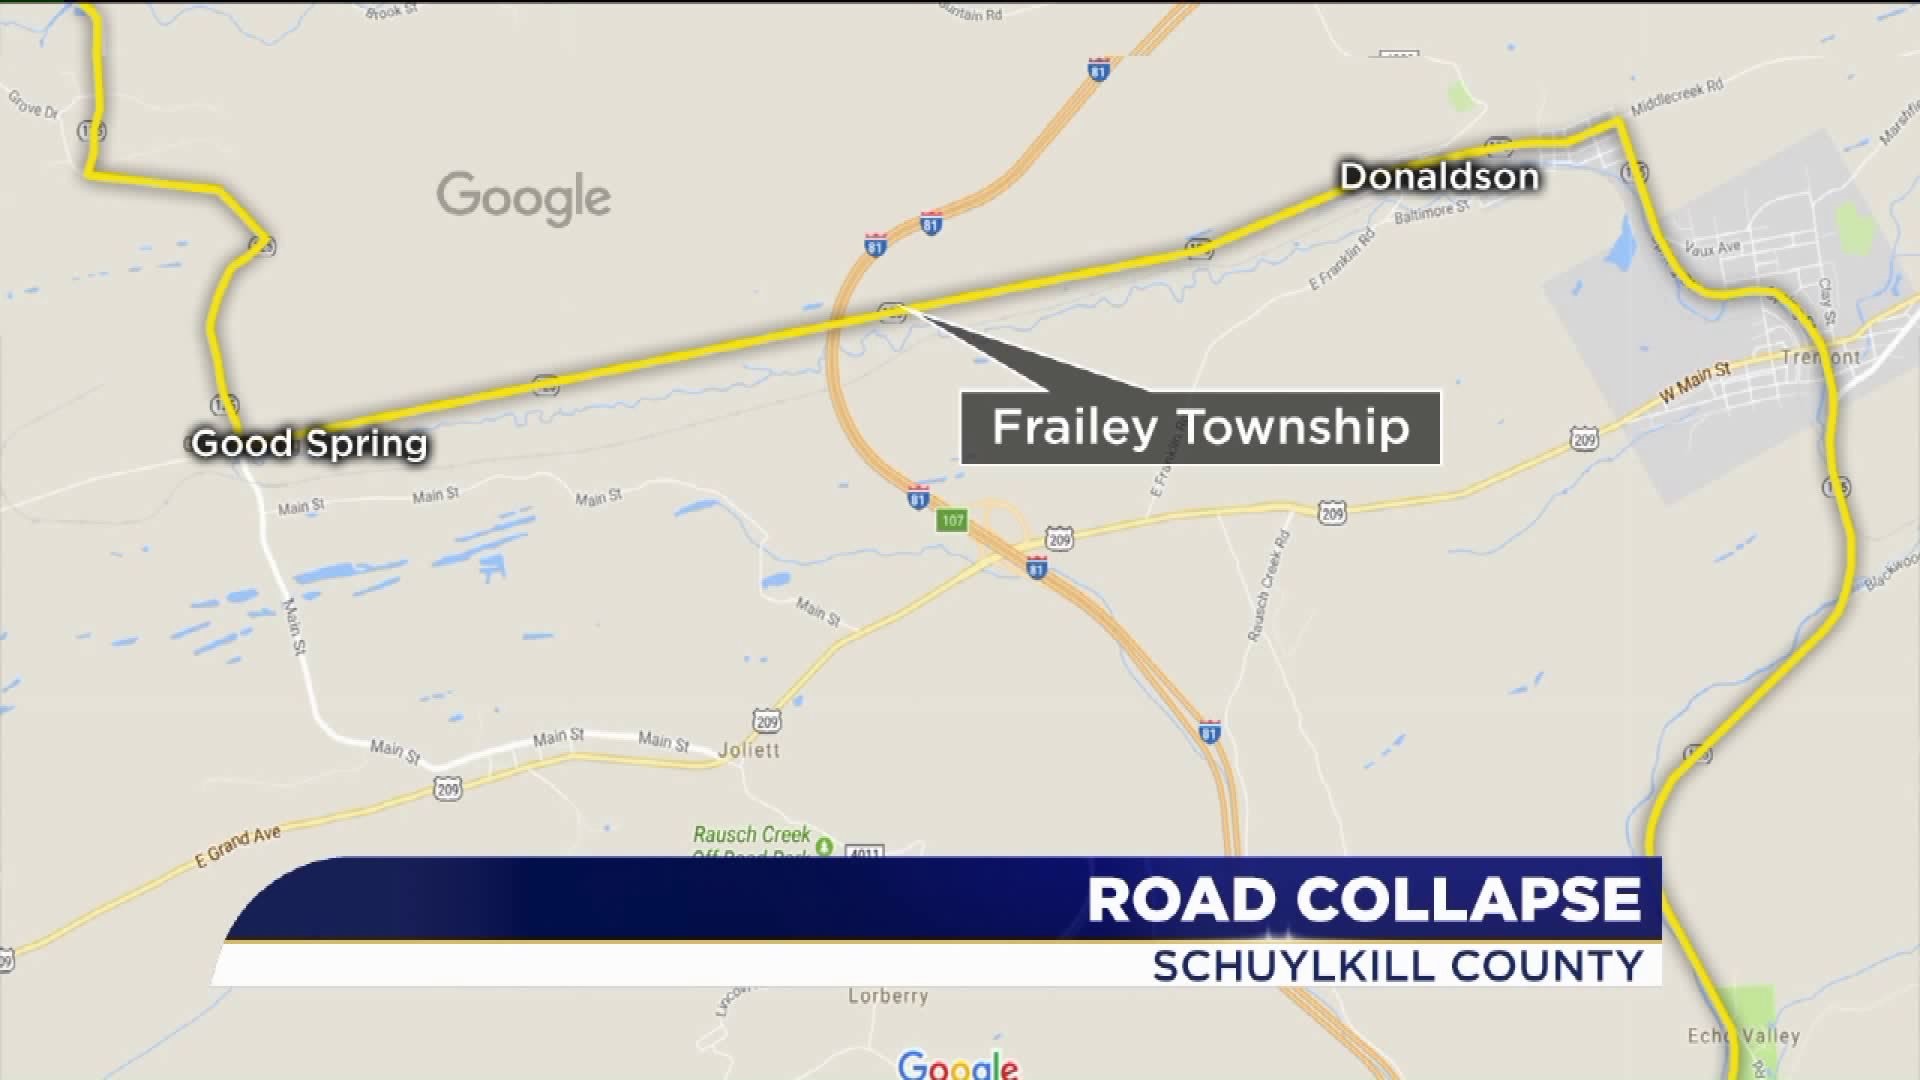 Route 125 Closed in Schuylkill County Following Road Collapse